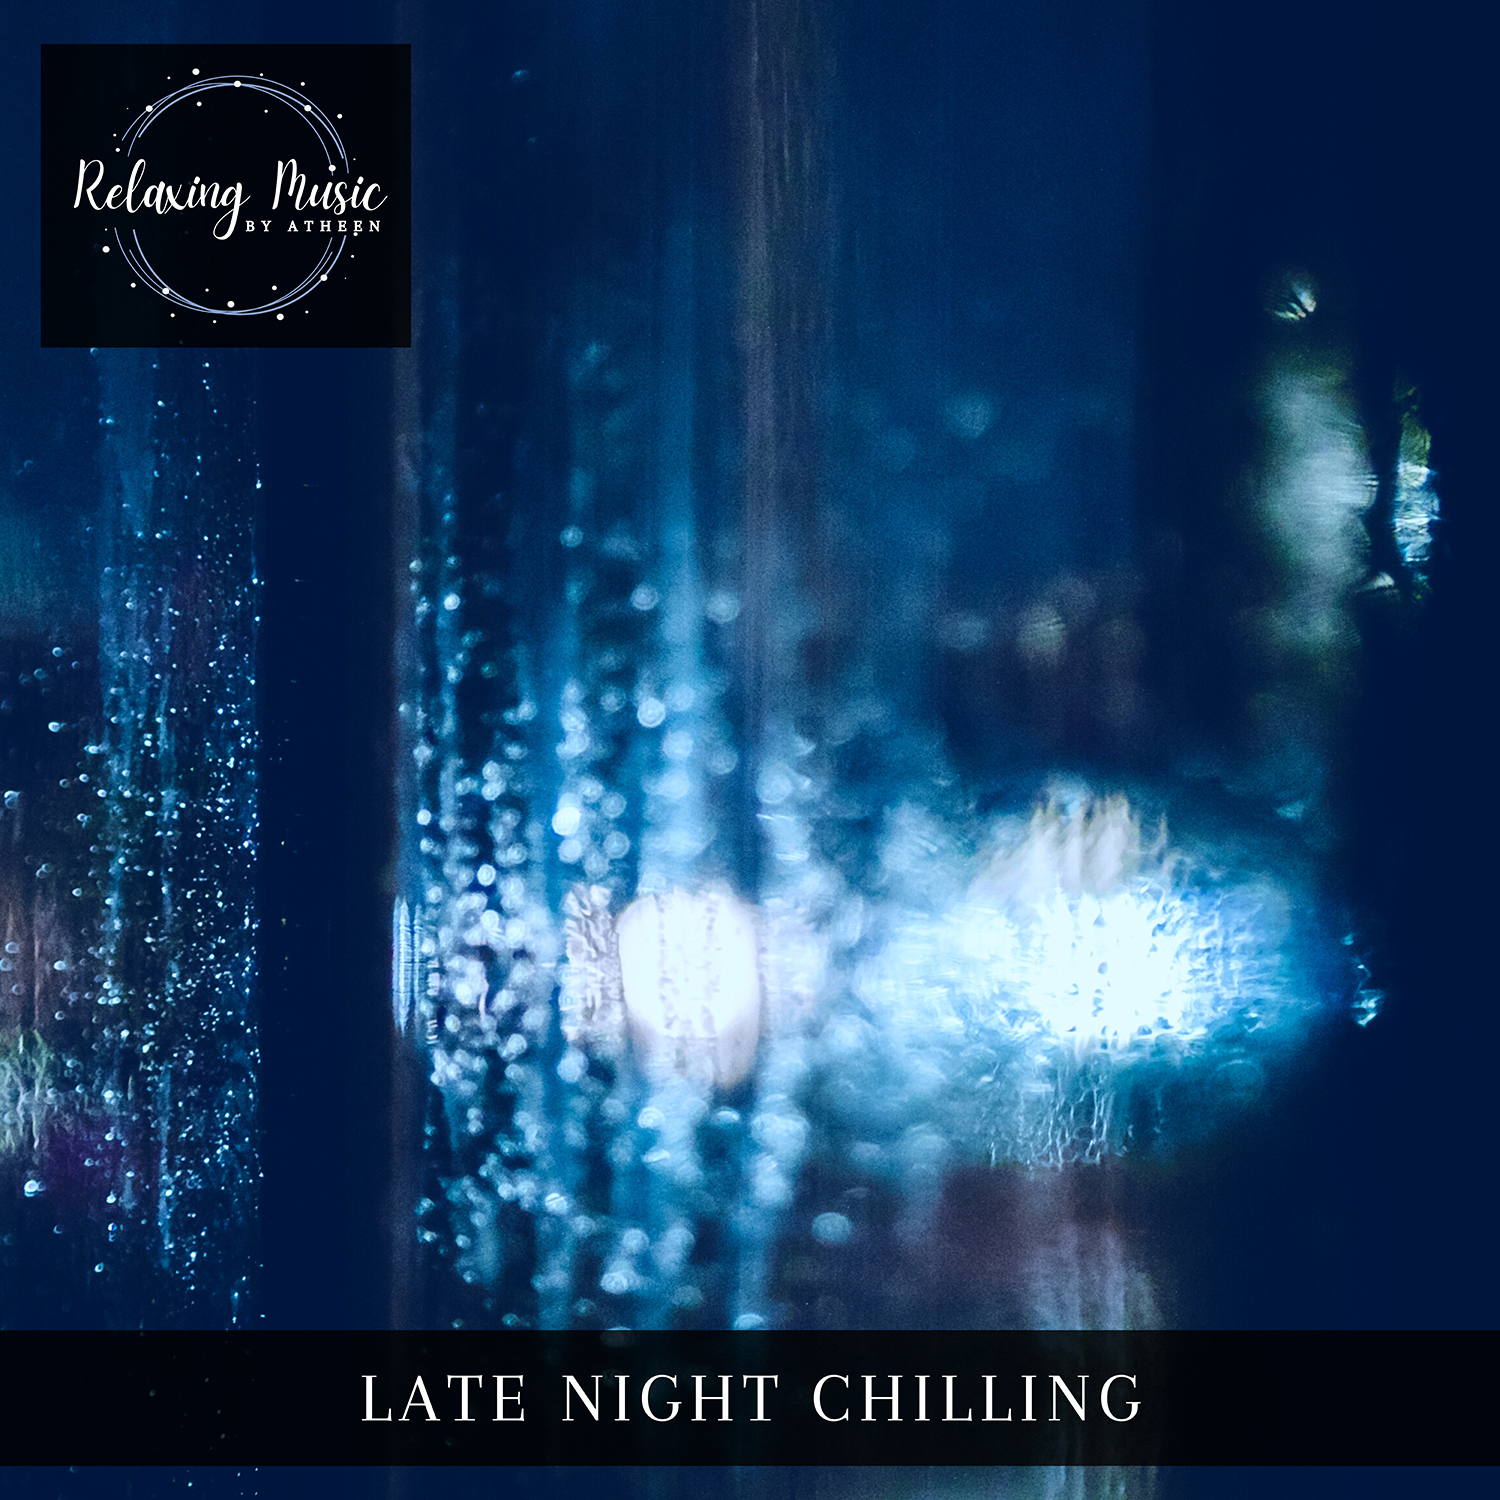 Relaxing Ambiences - Relaxing Music By Atheen - Late Night Chilling